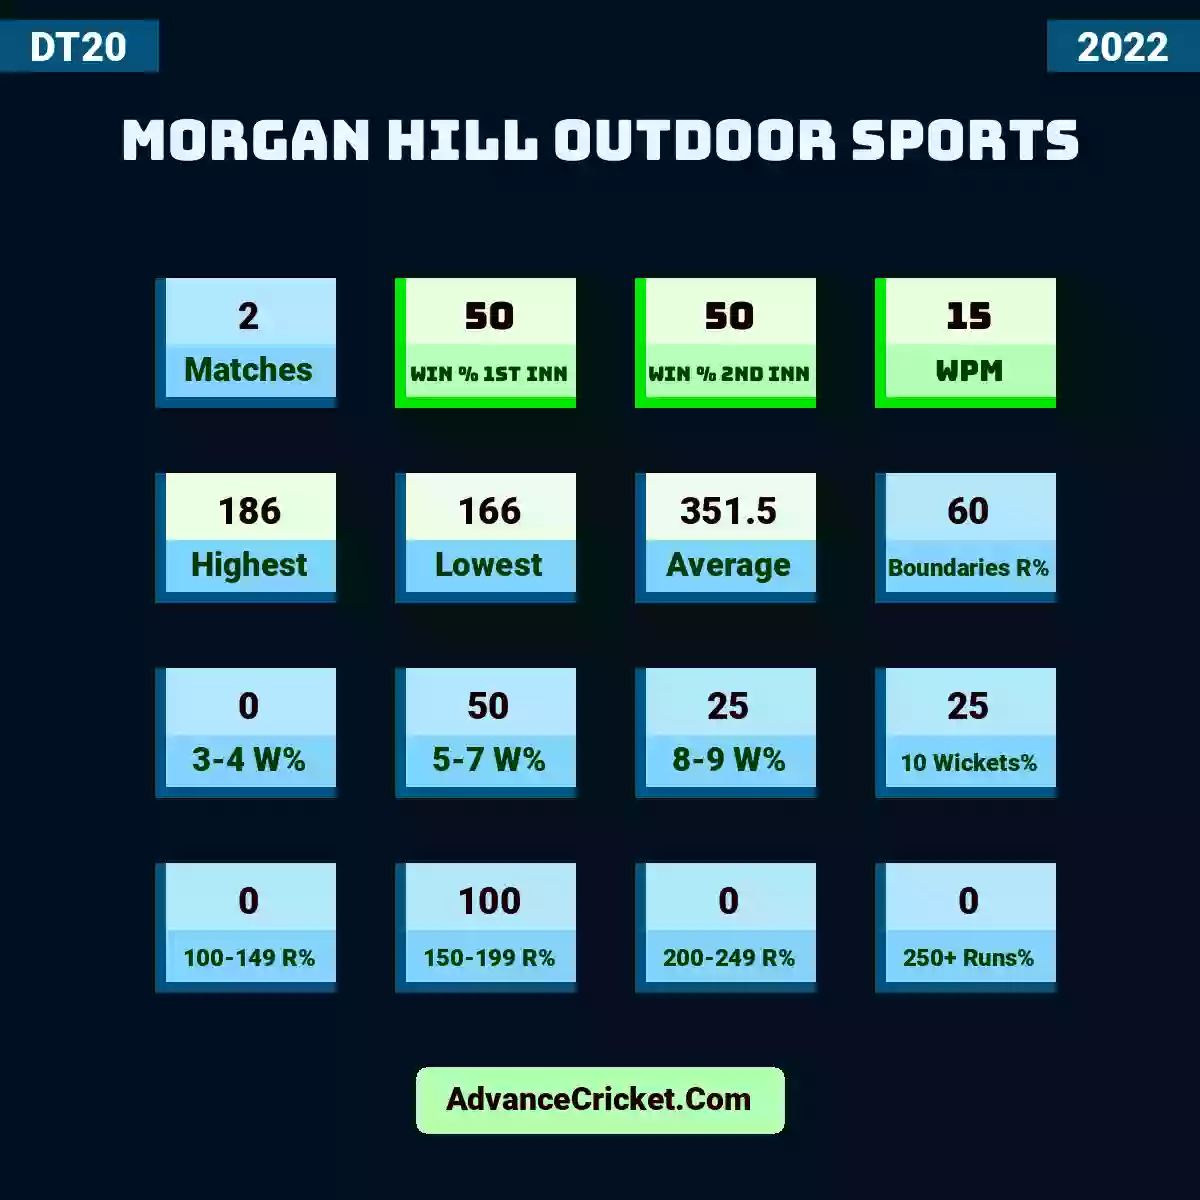 Image showing Morgan Hill Outdoor Sports with Matches: 2, Win % 1st Inn: 50, Win % 2nd Inn: 50, WPM: 15, Highest: 186, Lowest: 166, Average: 351.5, Boundaries R%: 60, 3-4 W%: 0, 5-7 W%: 50, 8-9 W%: 25, 10 Wickets%: 25, 100-149 R%: 0, 150-199 R%: 100, 200-249 R%: 0, 250+ Runs%: 0.